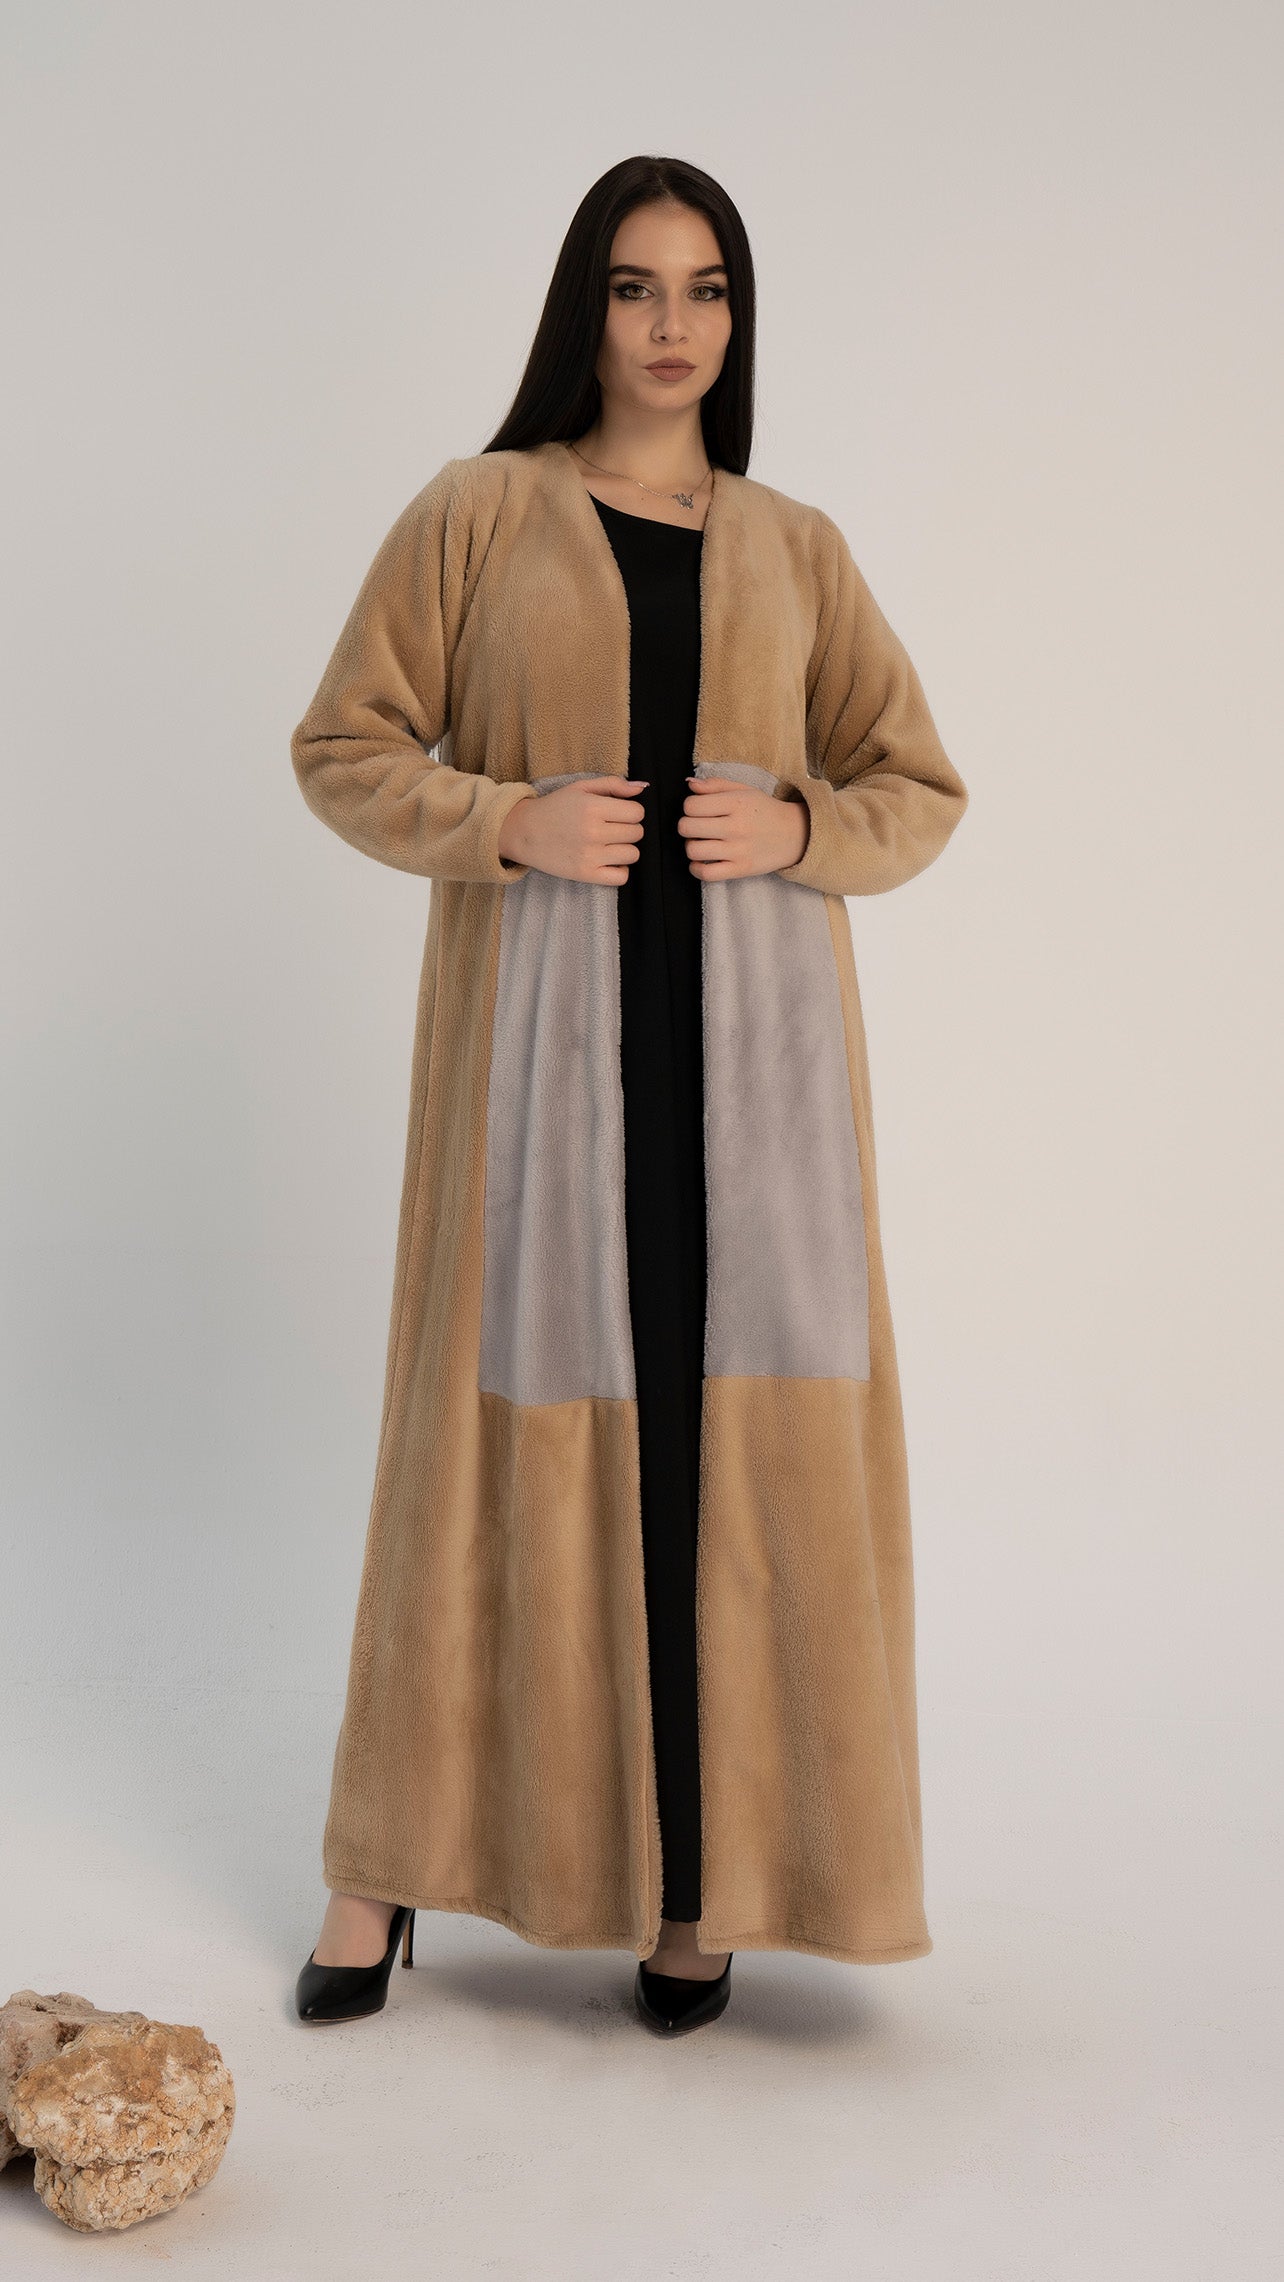 Woolen abaya with soft texture with color block pattern on front.